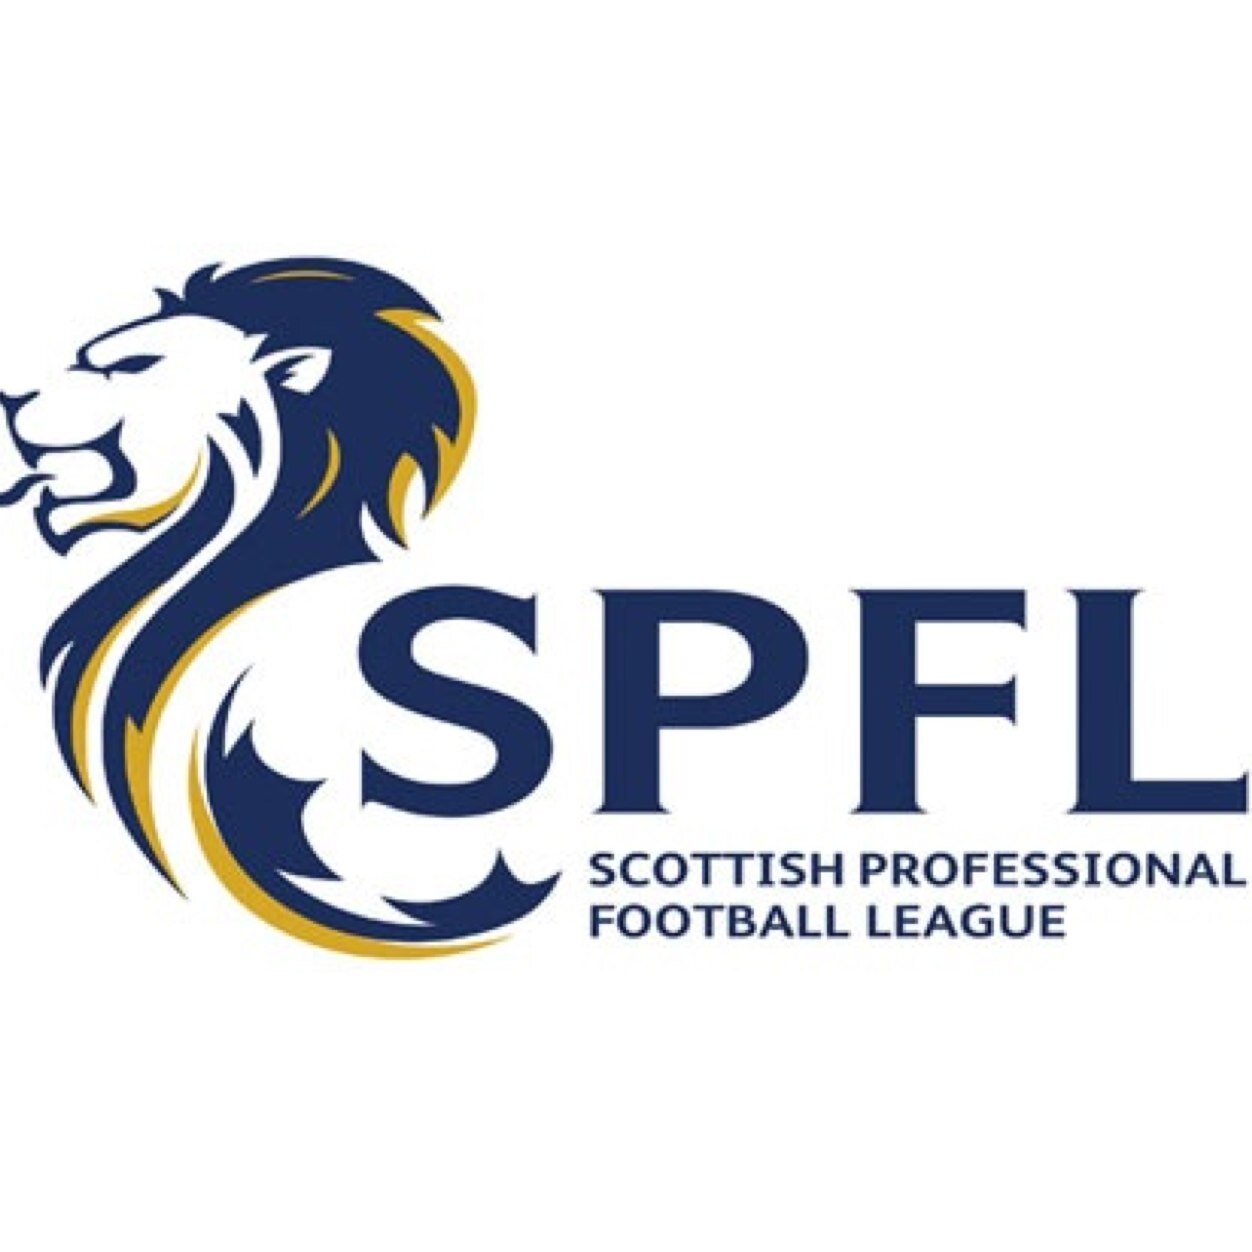 Coverage of the 44 Teams from the 4 Leagues in the Scottish Proffesional Football Leagues.